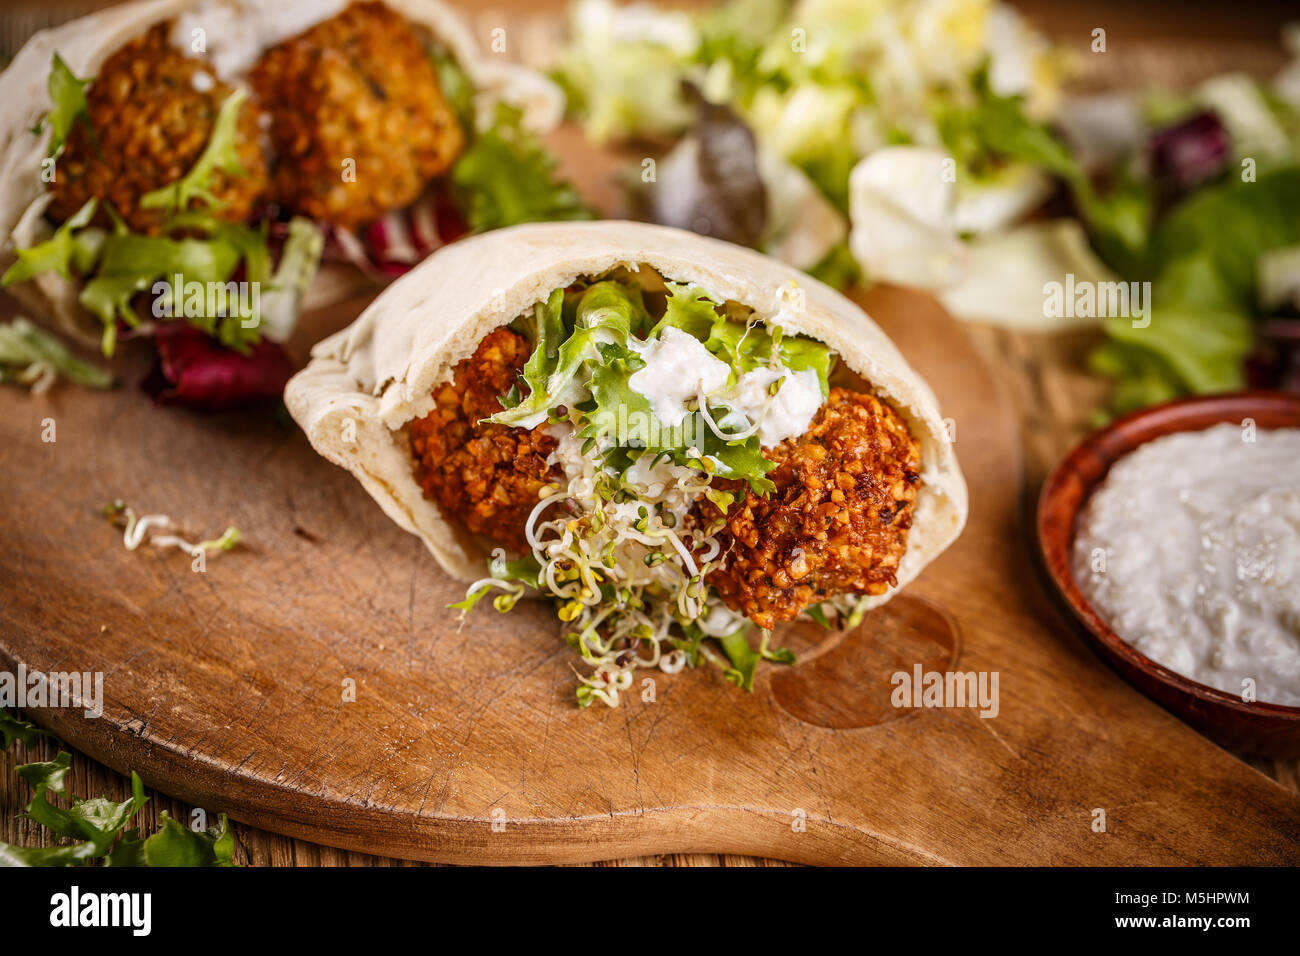 Fresh made falafel sandwich with sprout and tahini sauce Stock Photo